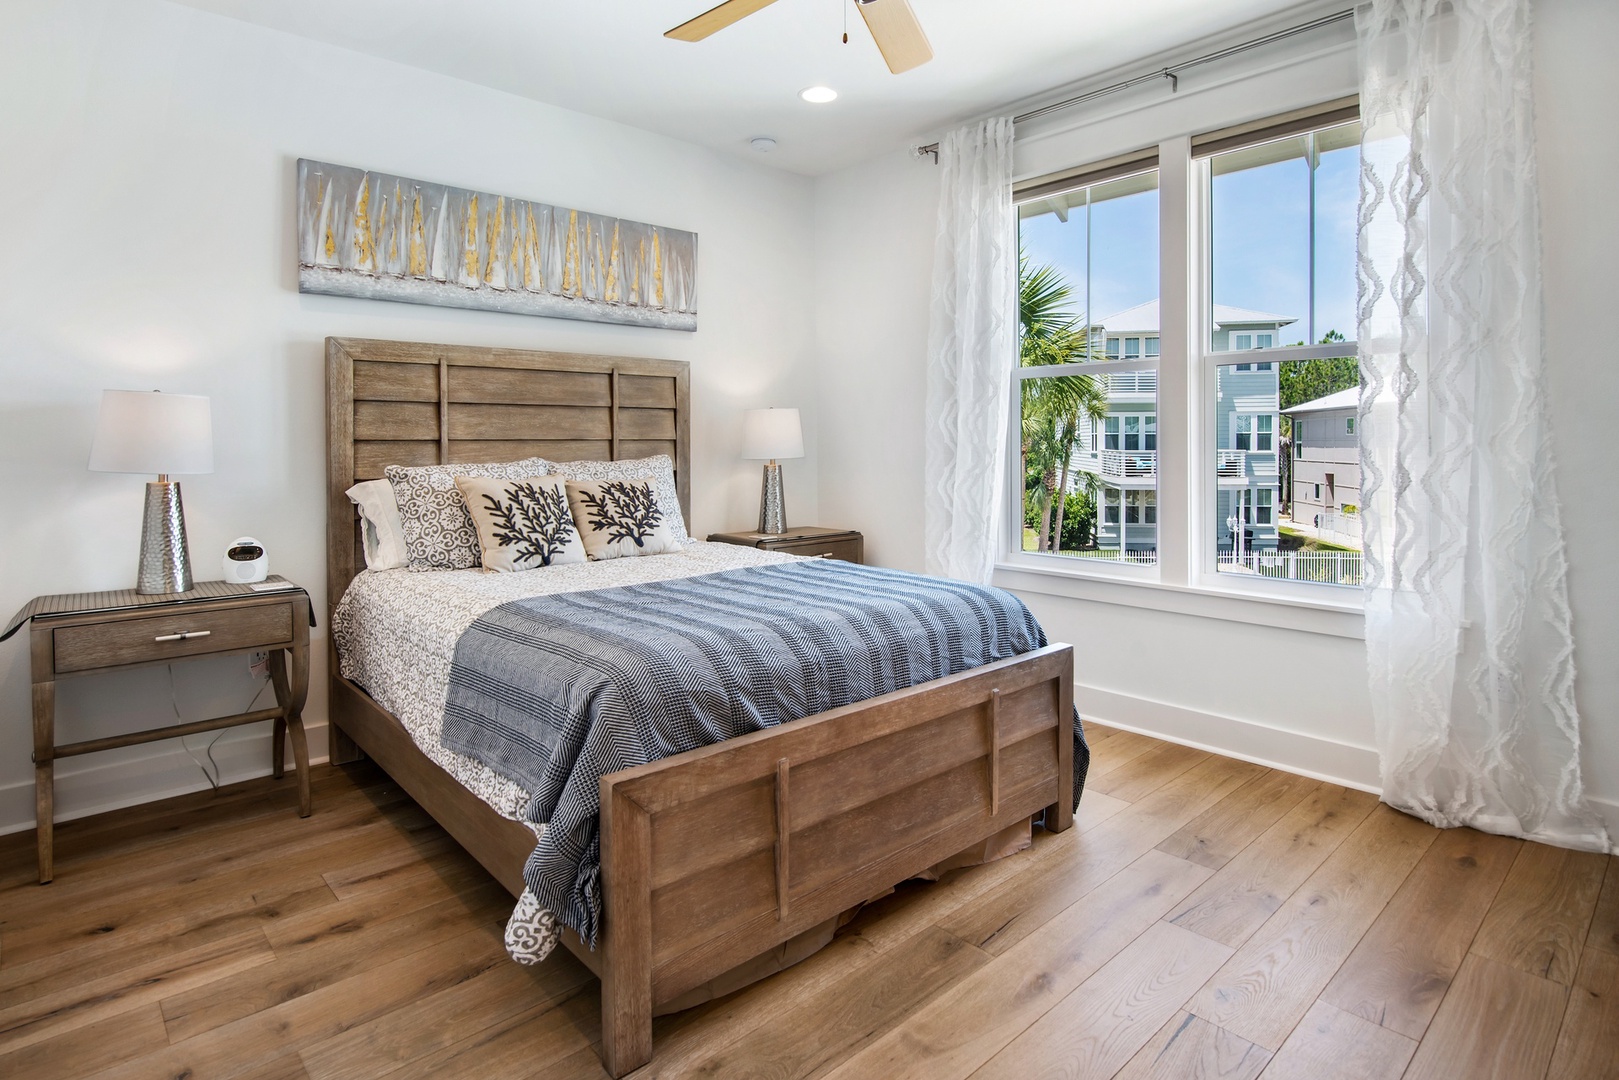 The first upstairs bedroom features a queen-bed and amazing pool views!